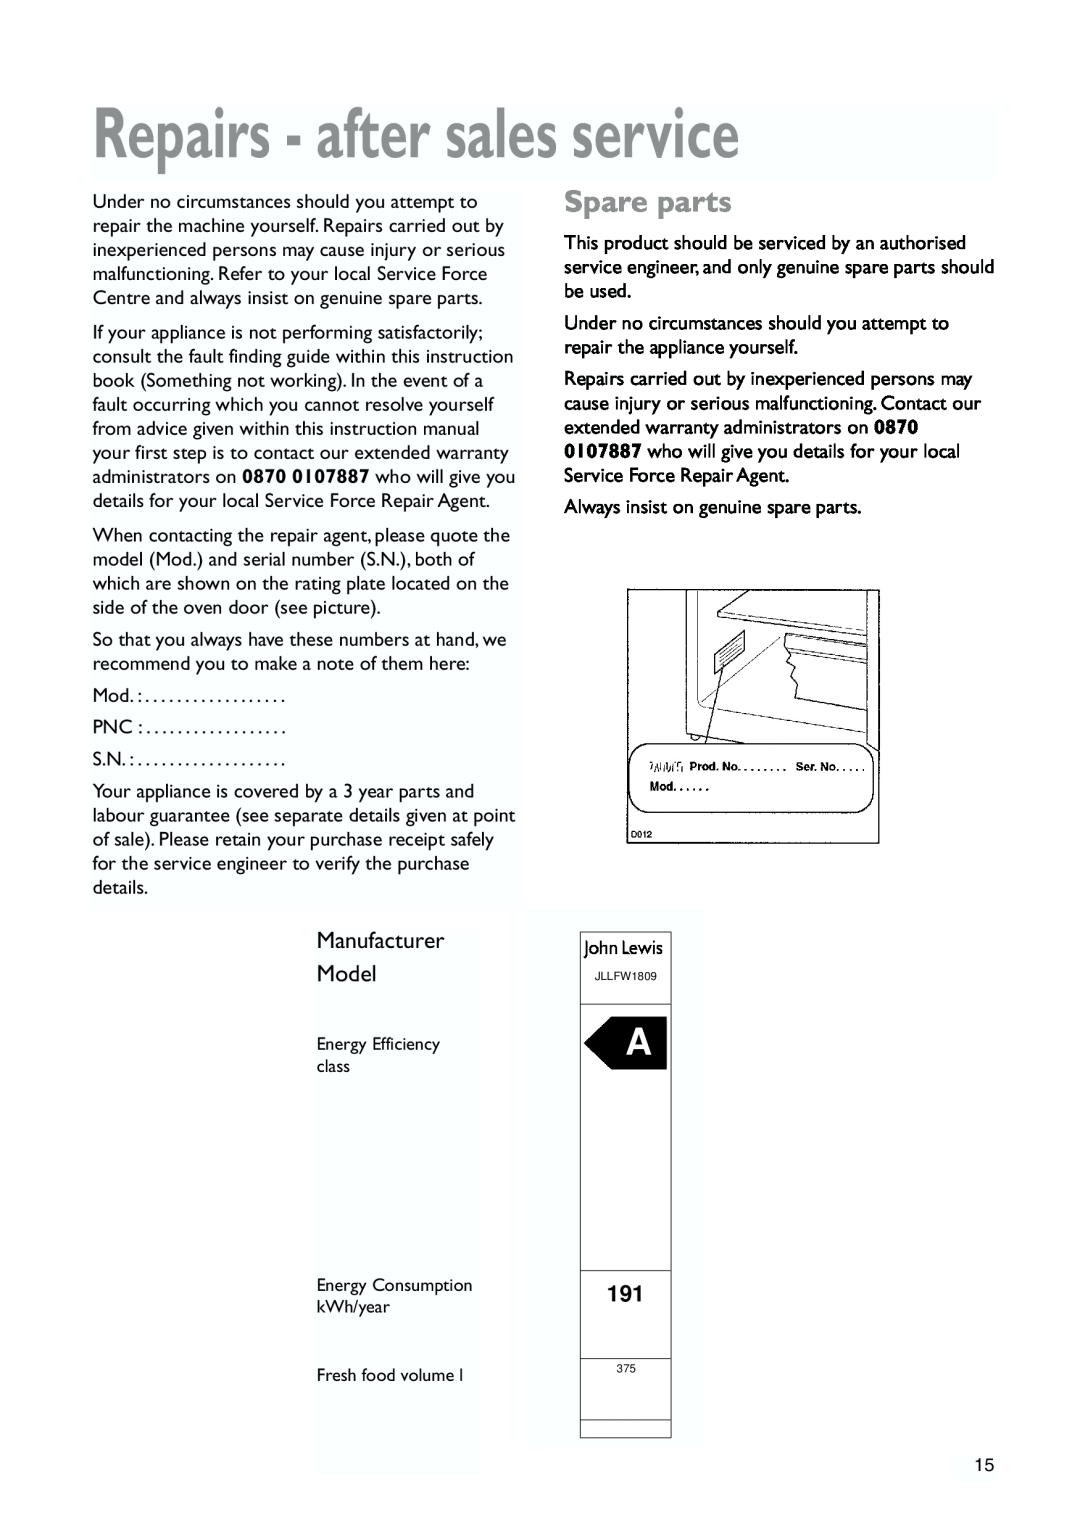 John Lewis JLLFW1809 instruction manual Repairs - after sales service, Spare parts, Manufacturer Model 